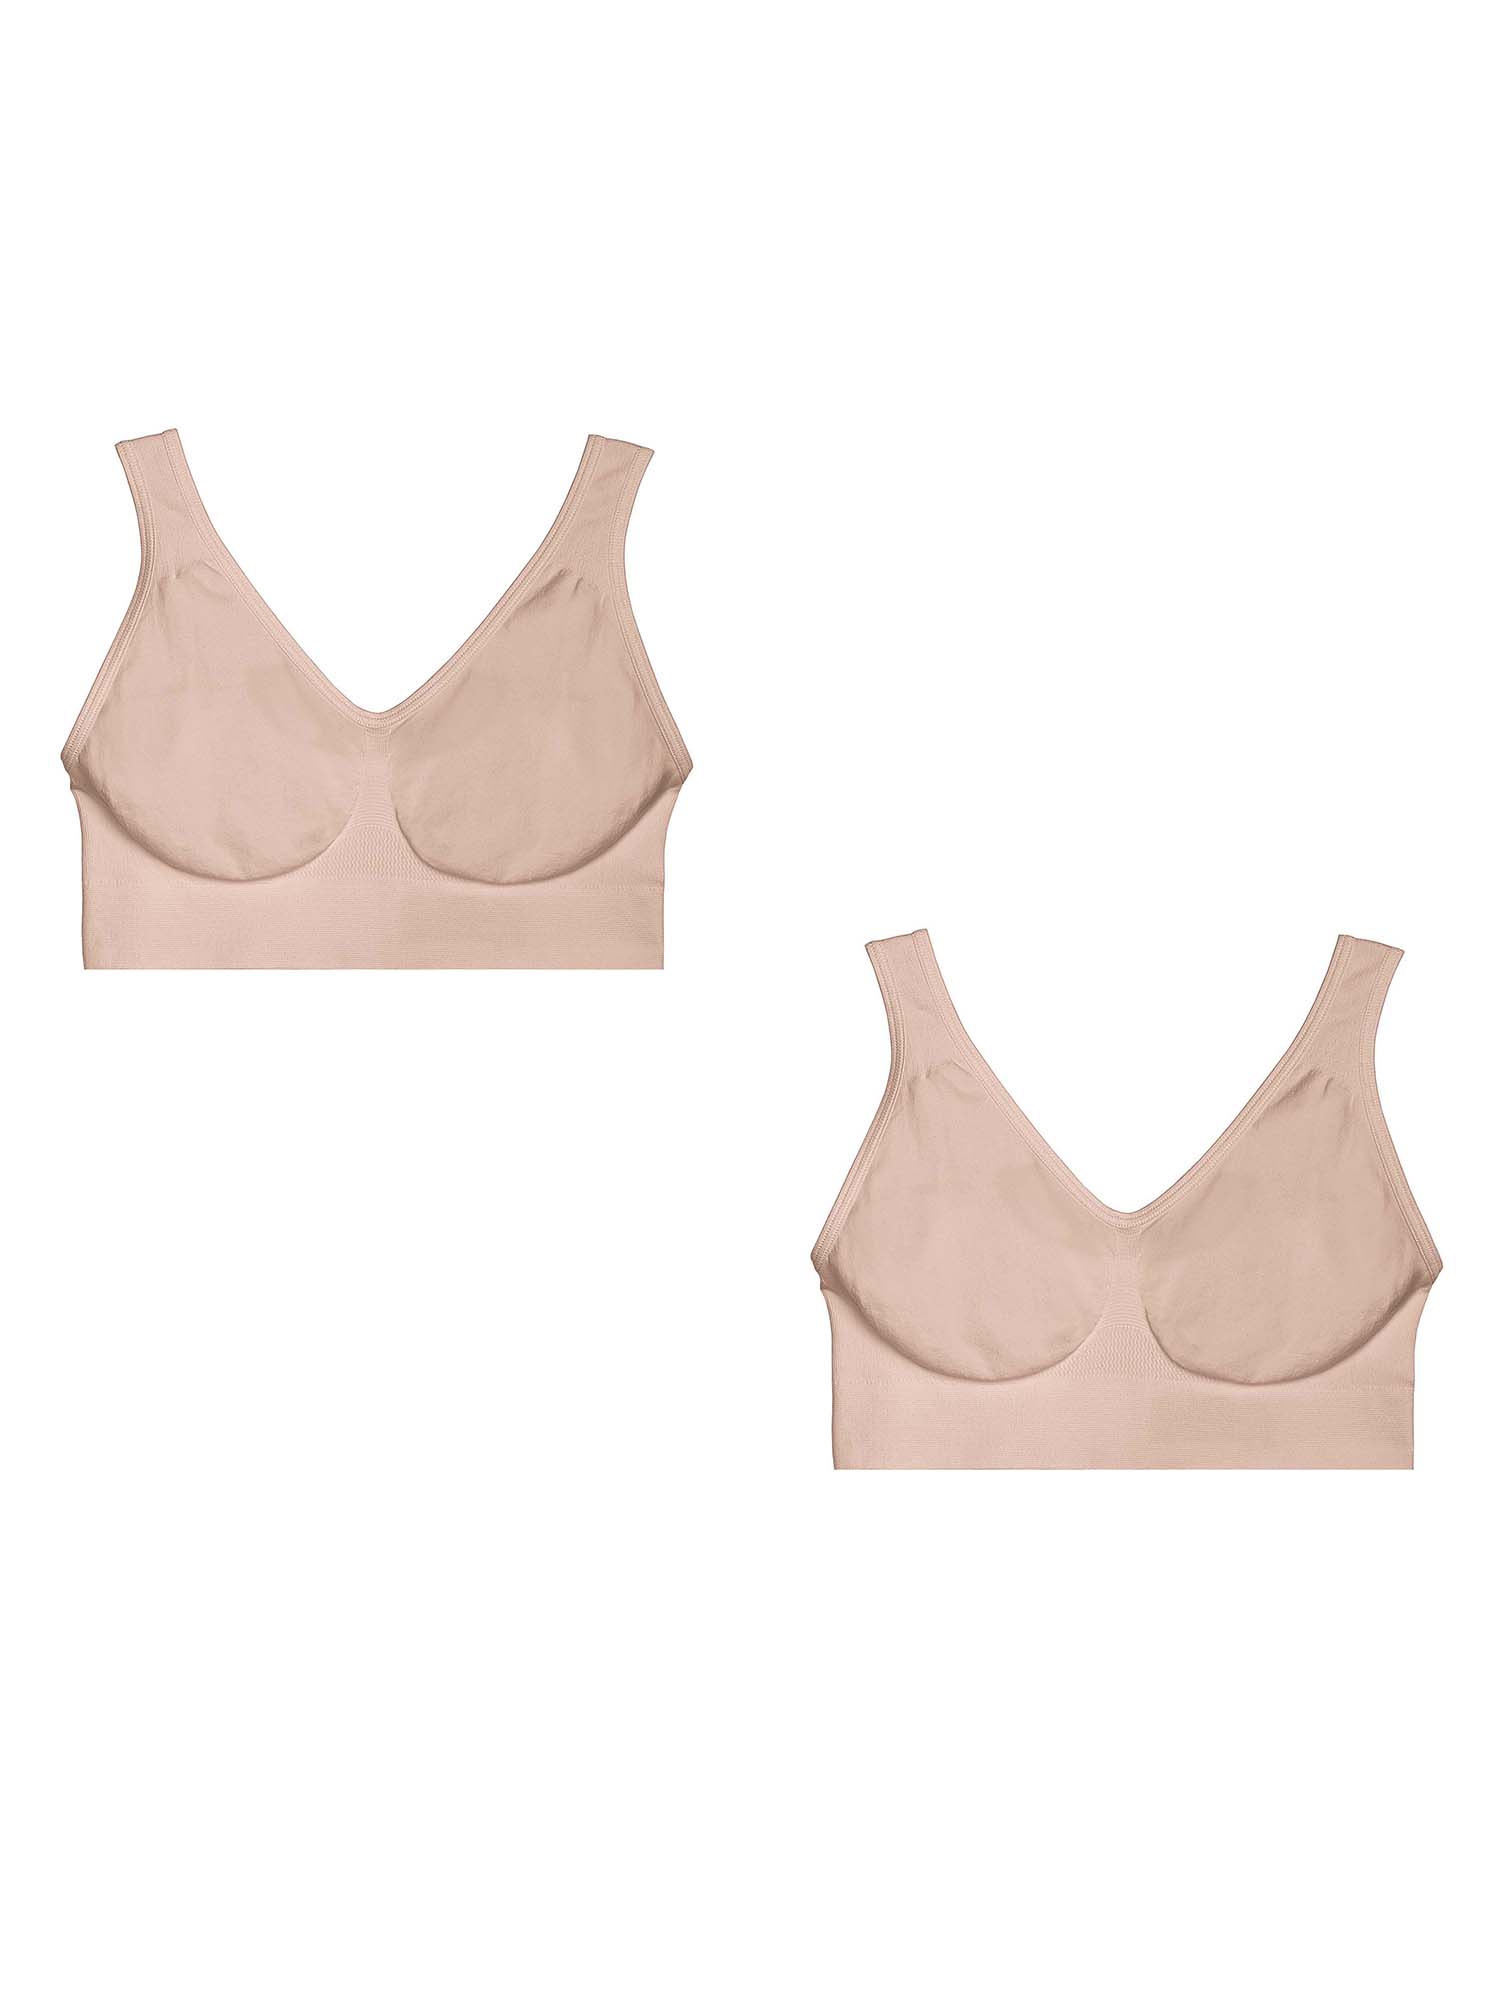 Hanes Women's Cozy Pullover Bra, 2 pack - Style G19B - image 3 of 8